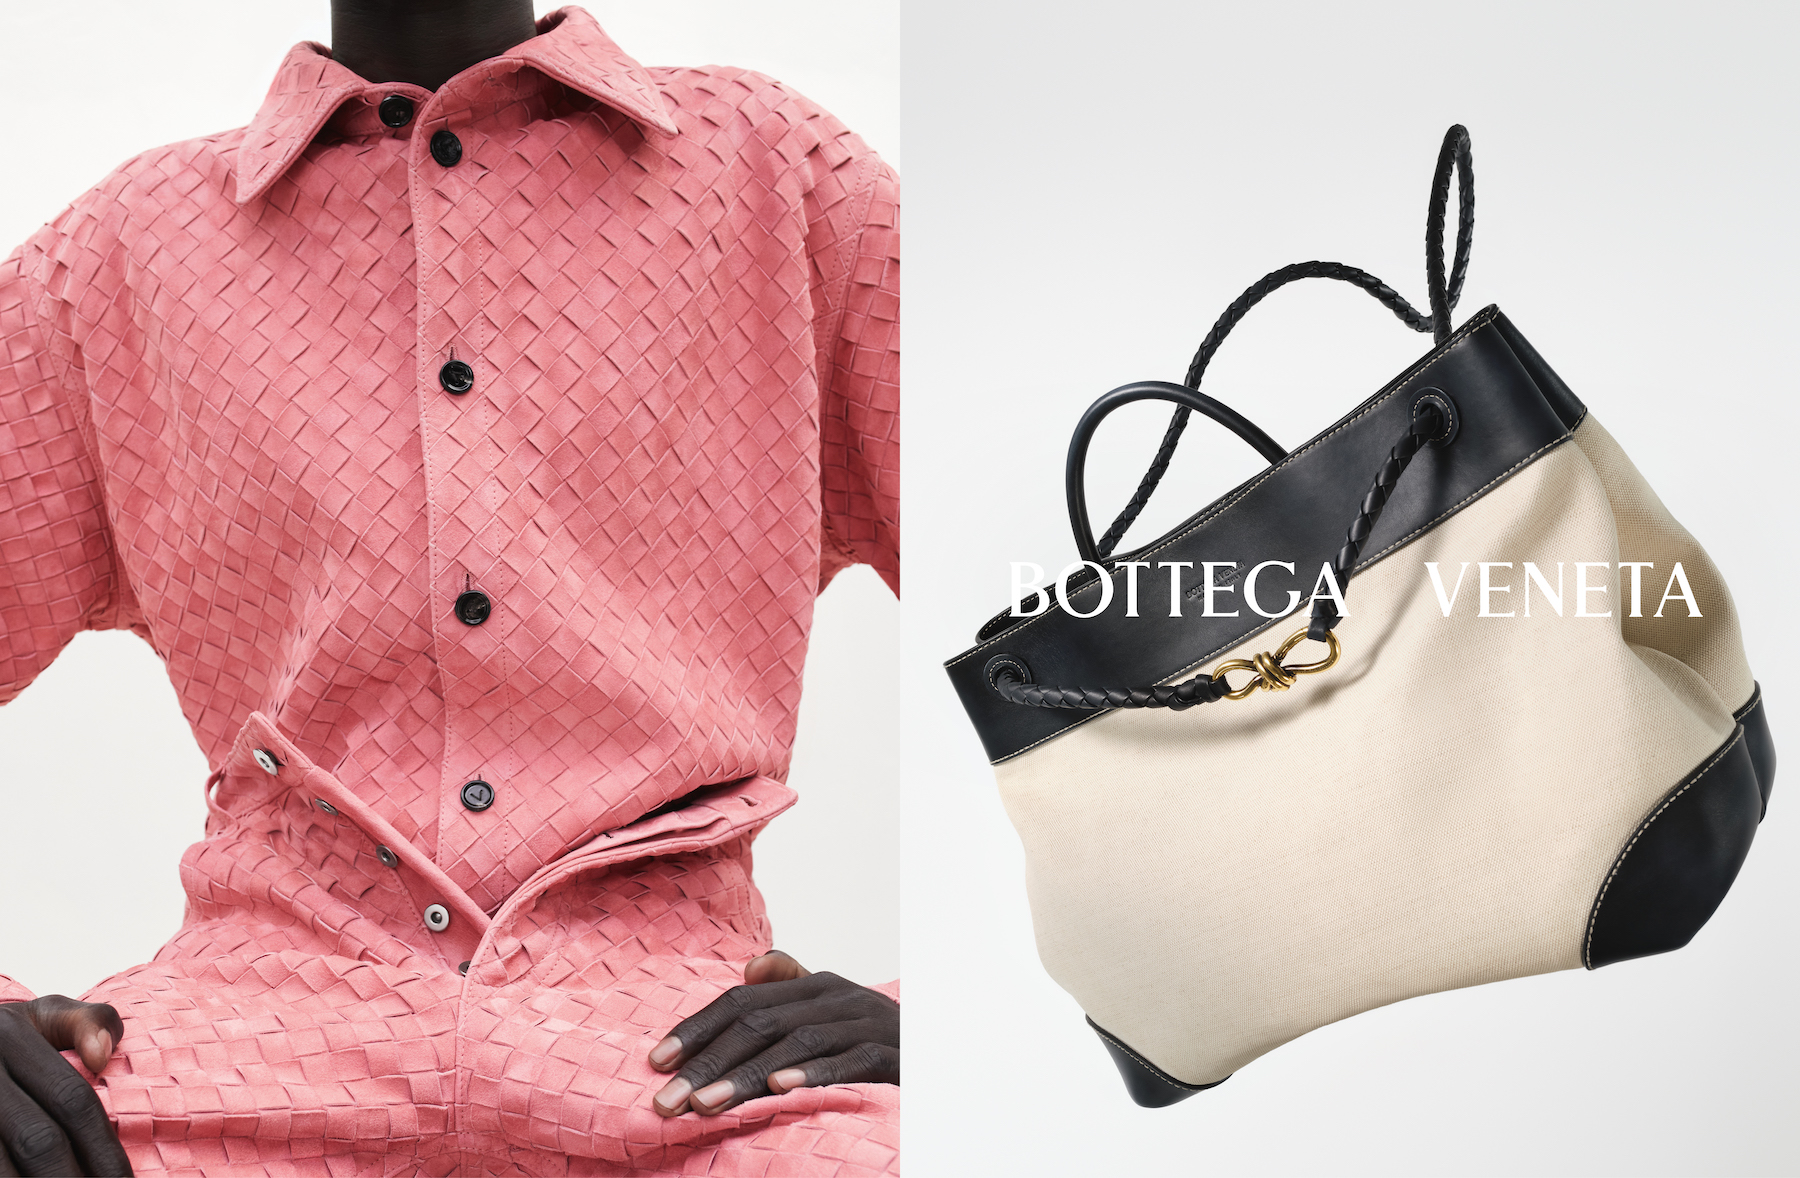 You’ll Want Every Piece from Bottega Veneta’s Stunning New Pre-Fall Campaign